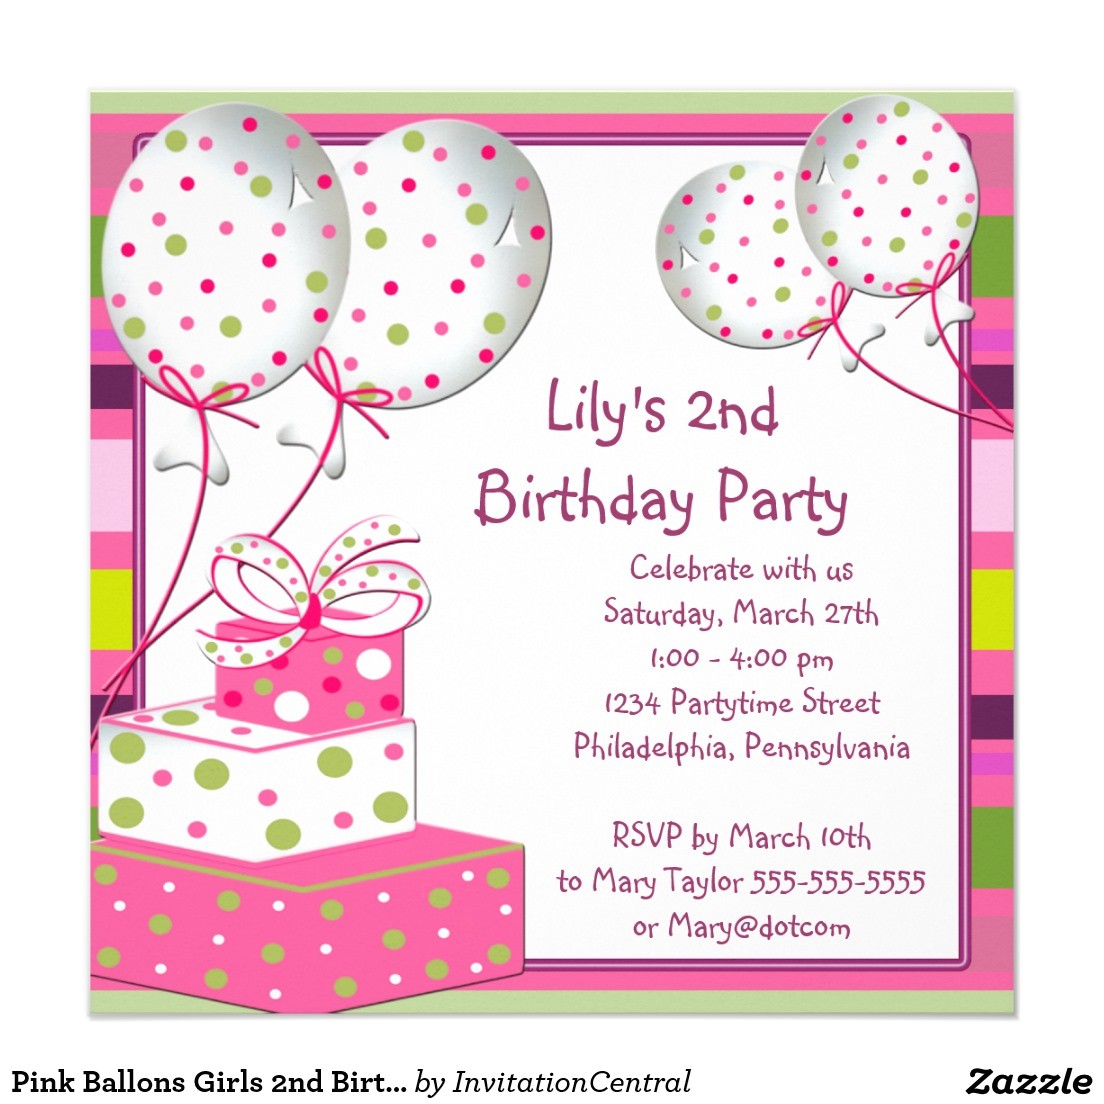 Make An Invitation Card for Birthday Party Invitation for Birthday